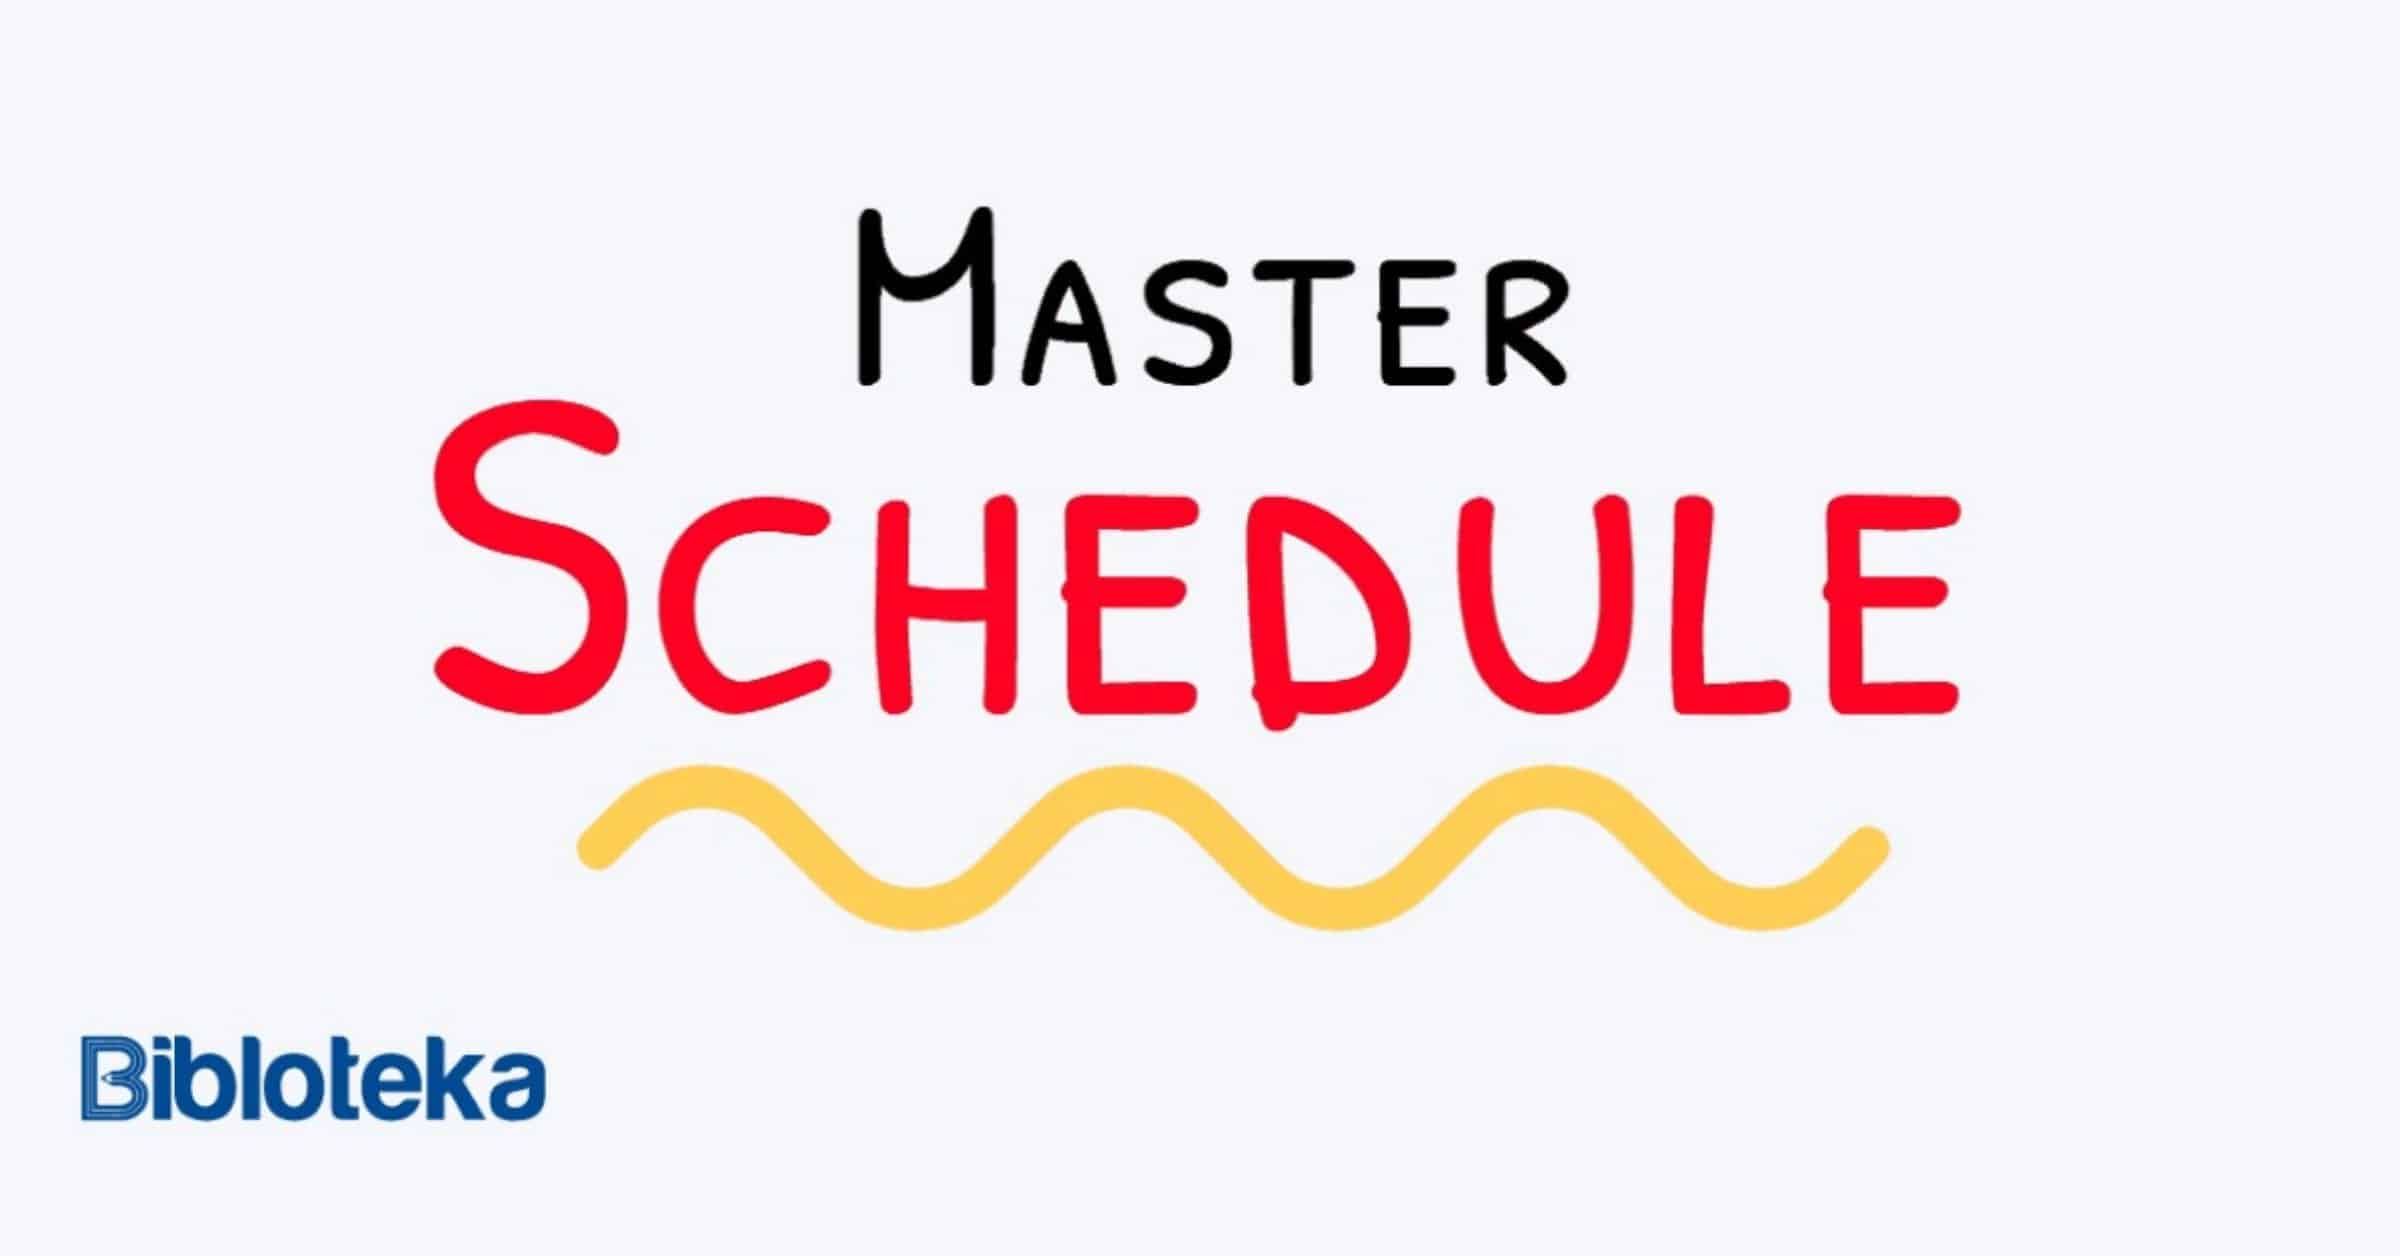 Master Schedule in Project Management